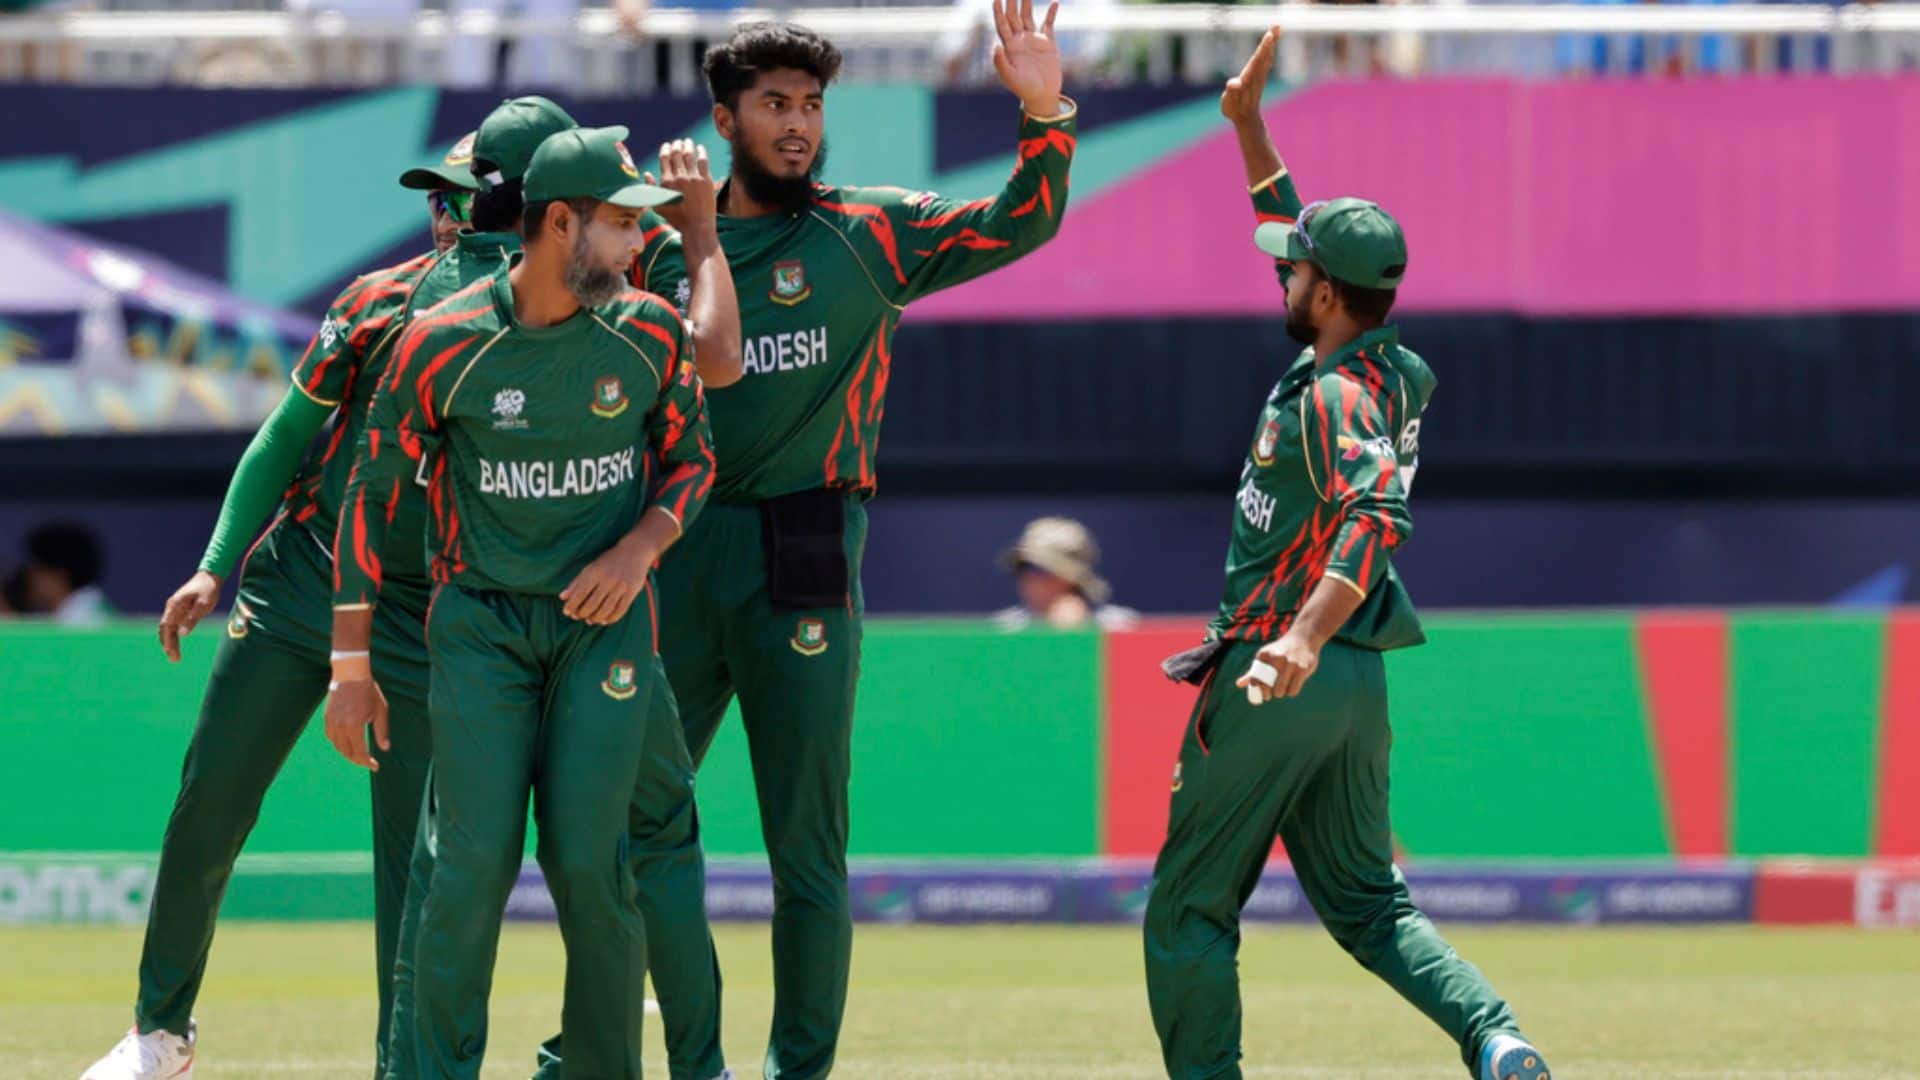 Bangladesh defeated the Dutch to clinch their 2nd win [X]